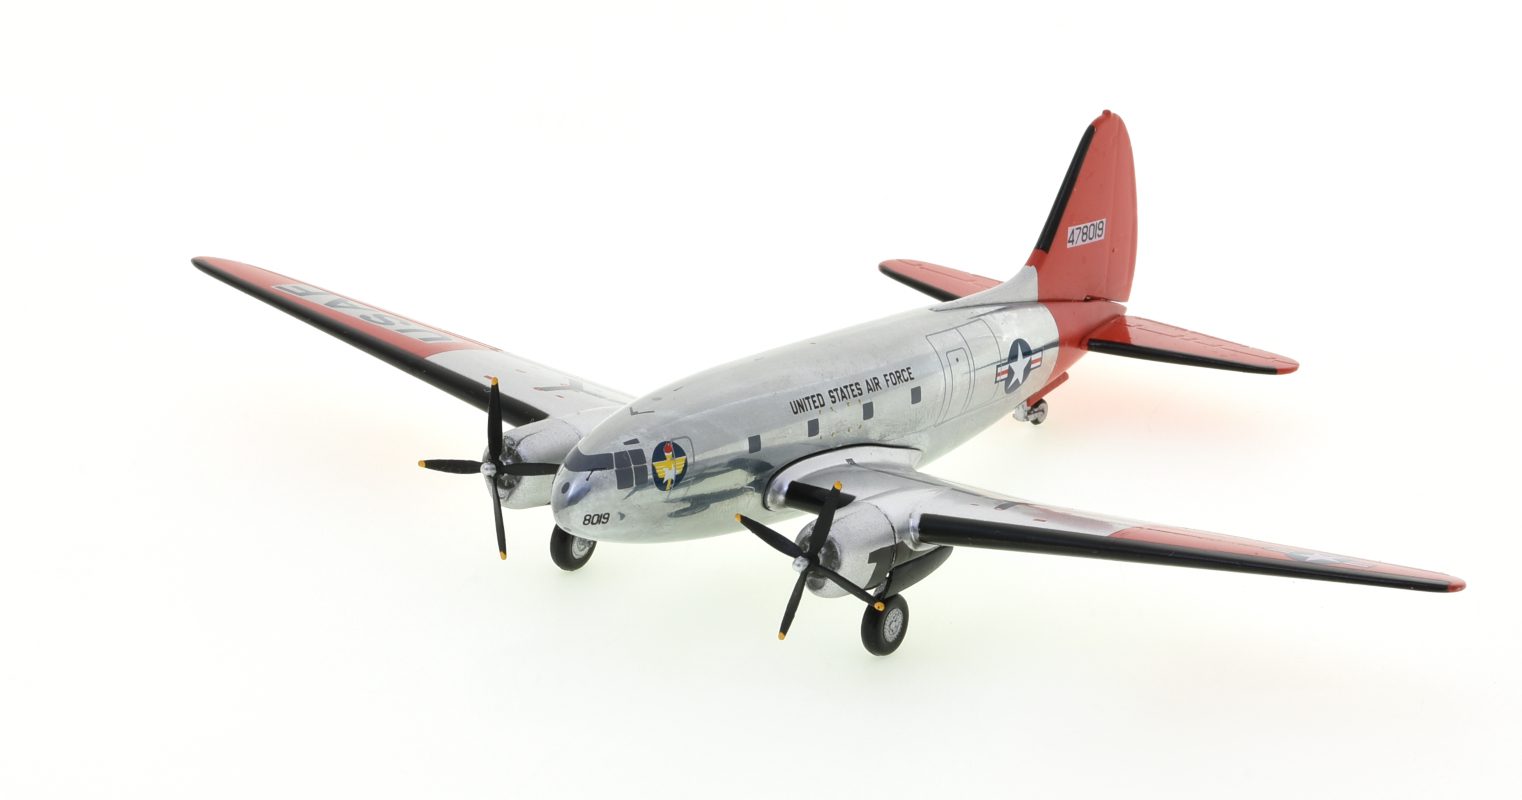 Front port side view of the Curtiss C-46D Commando  1/200 scale diecast model, s/n 44-78019, 3499th Mobil Training Wing, Chanute AFB, circa 1954 - AeroClassics AC219753